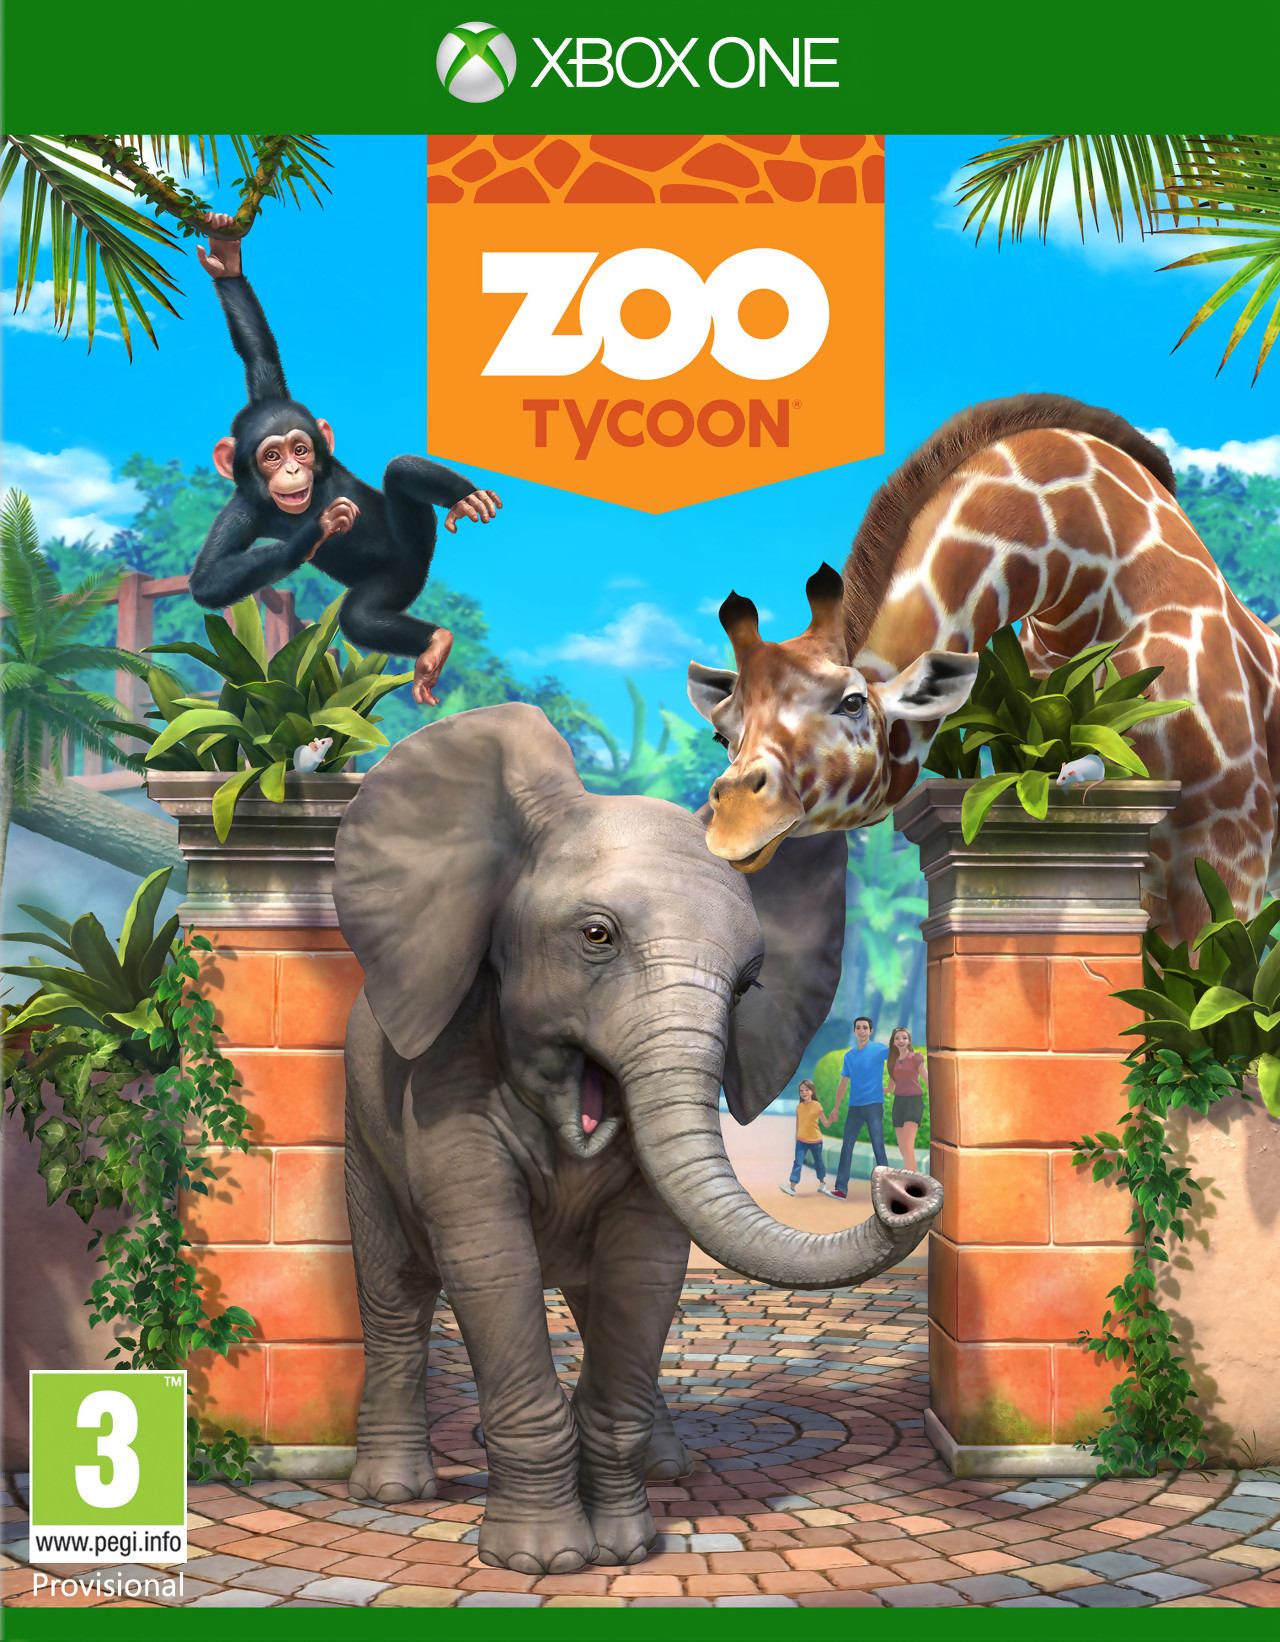 comment soigner zoo tycoon xbox one